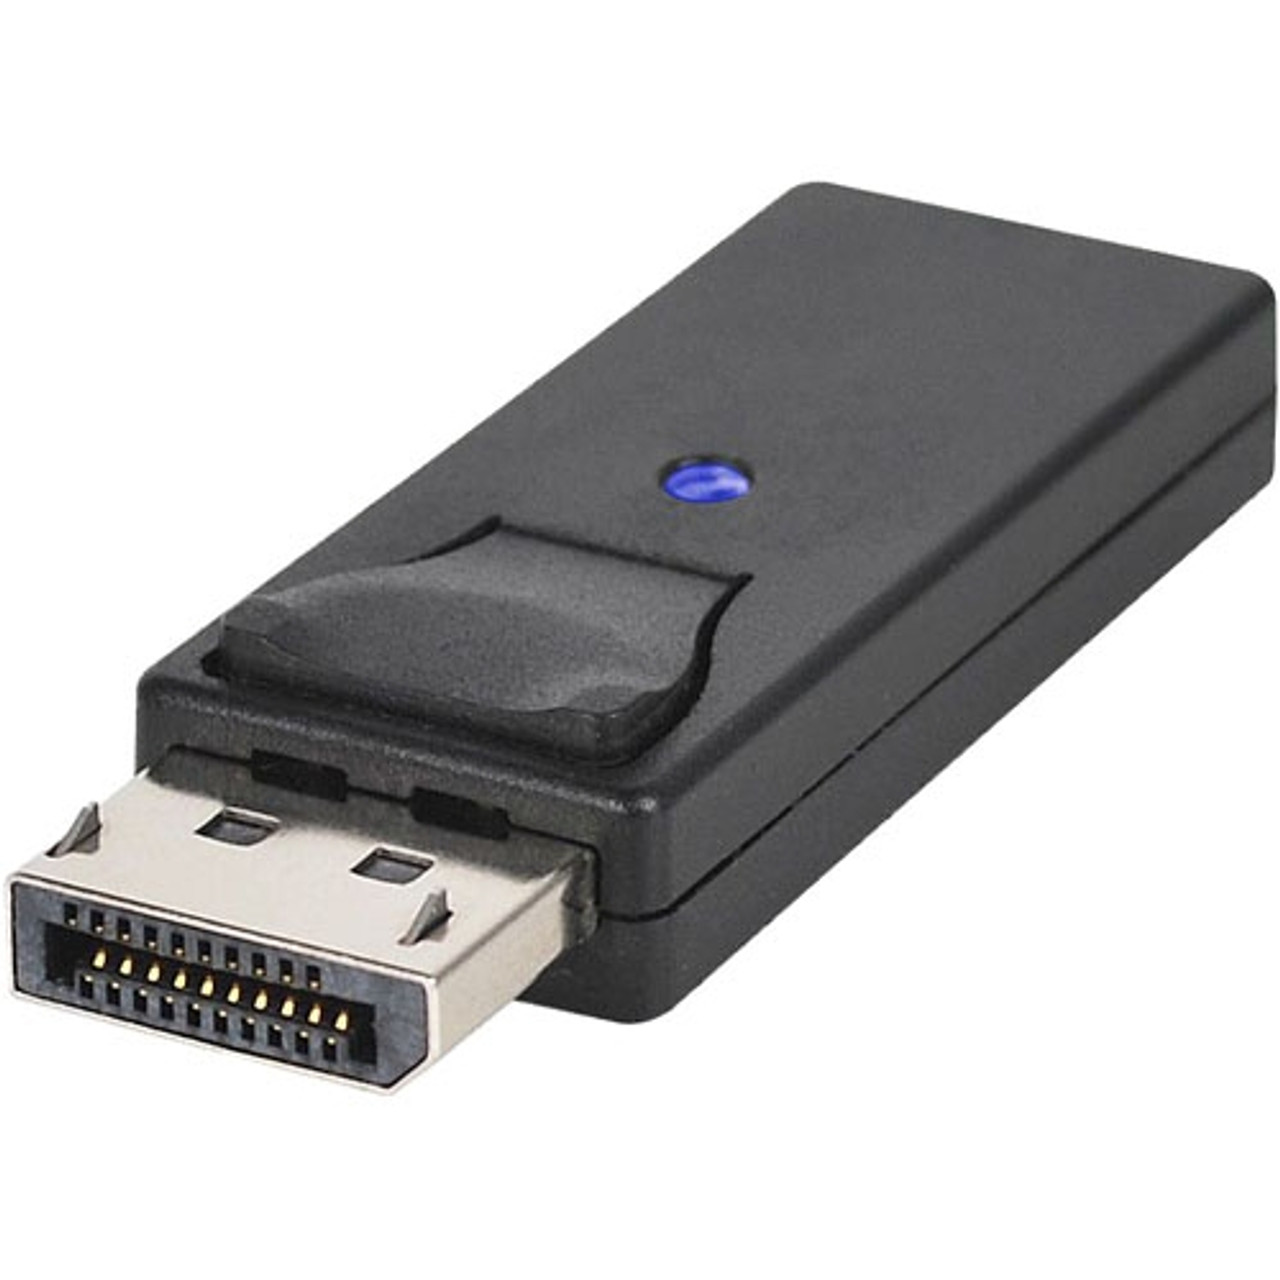 CB-DP0811-S1 SIIG Easily Adapts Displayport Systems To Work With HDmi Displays